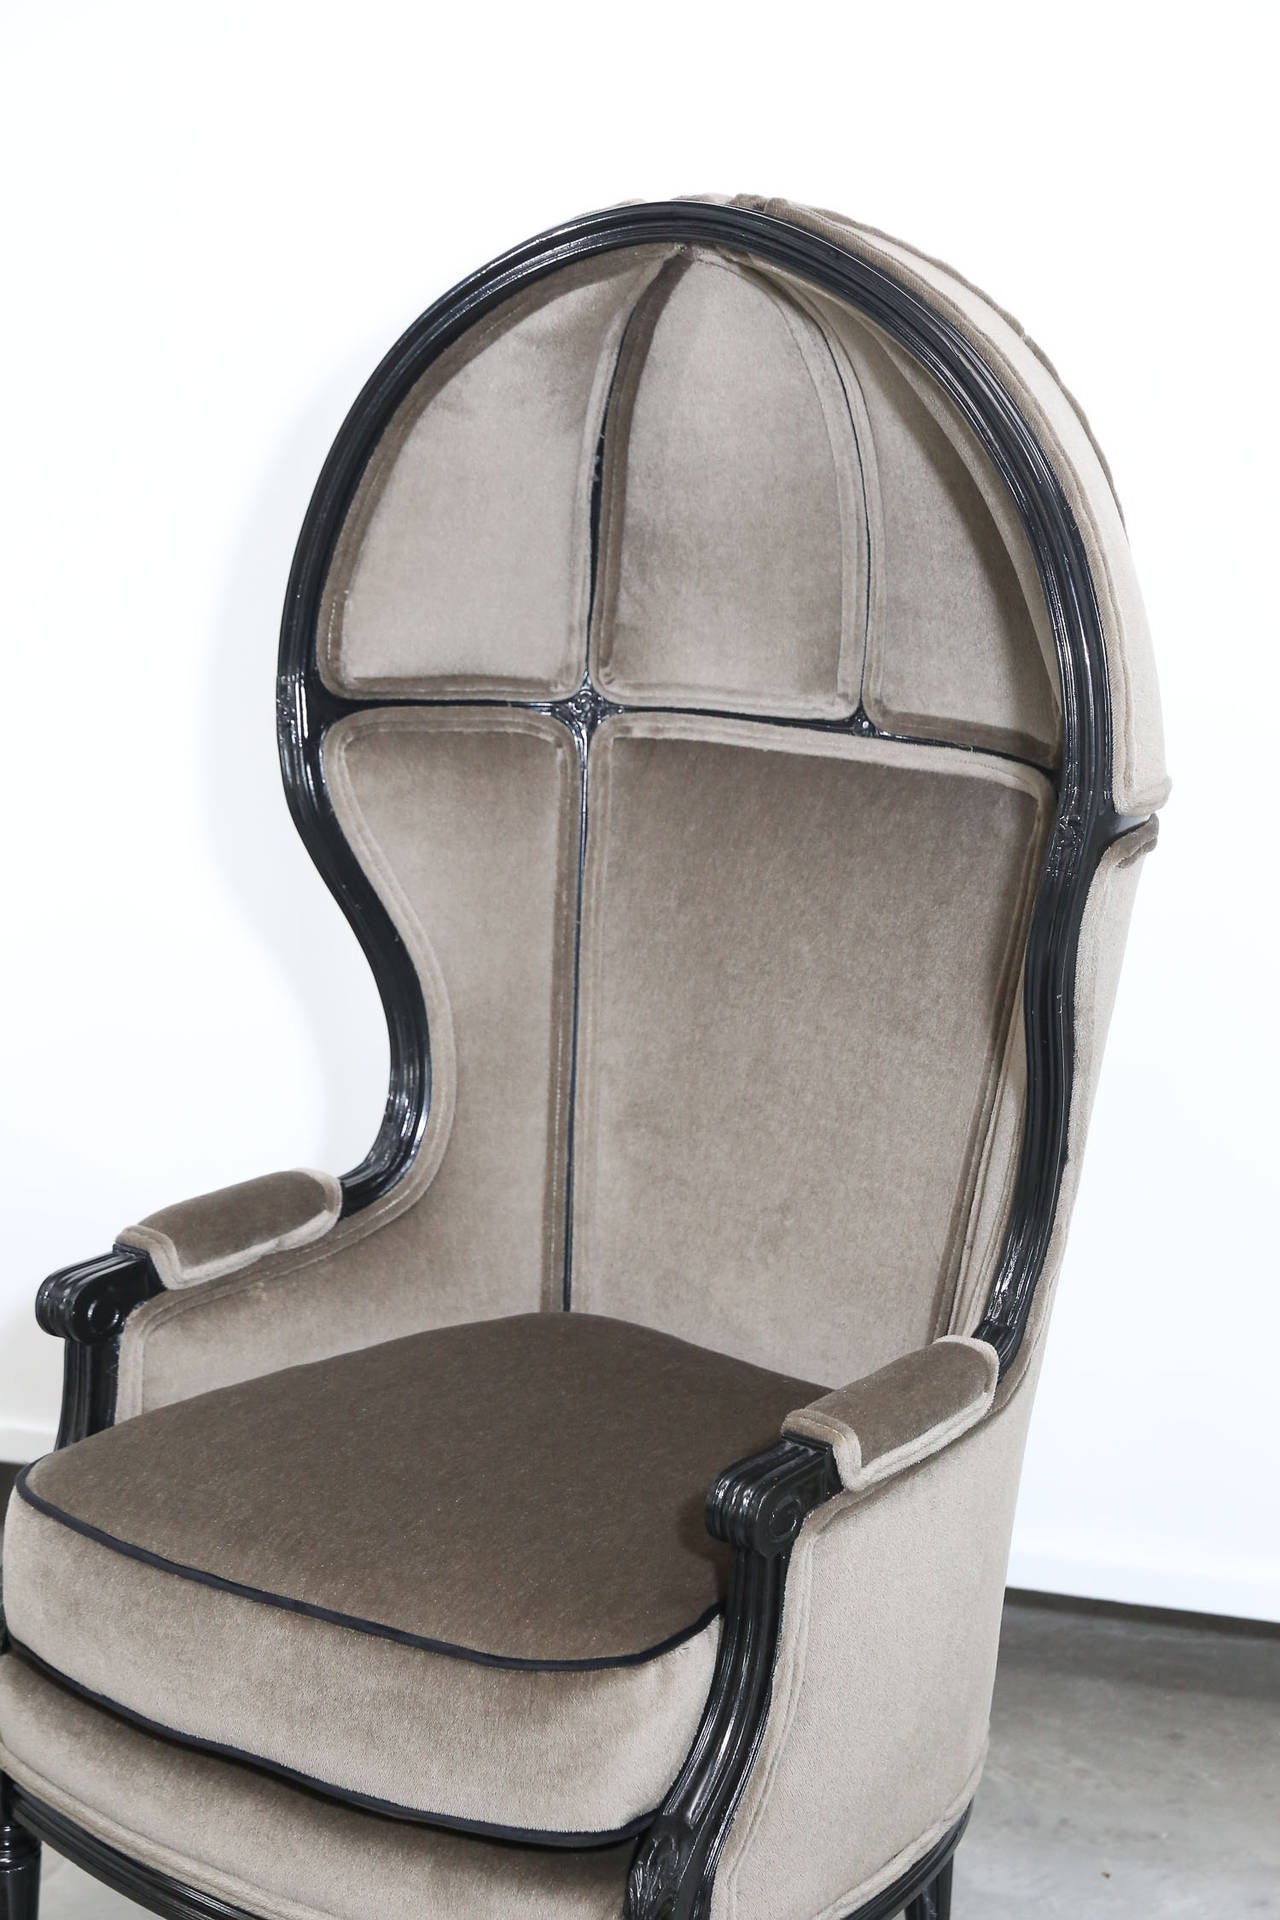 French Provincial French Hooded Chair Newly Lacquered and Newly Upholstered in Mohair Velvet